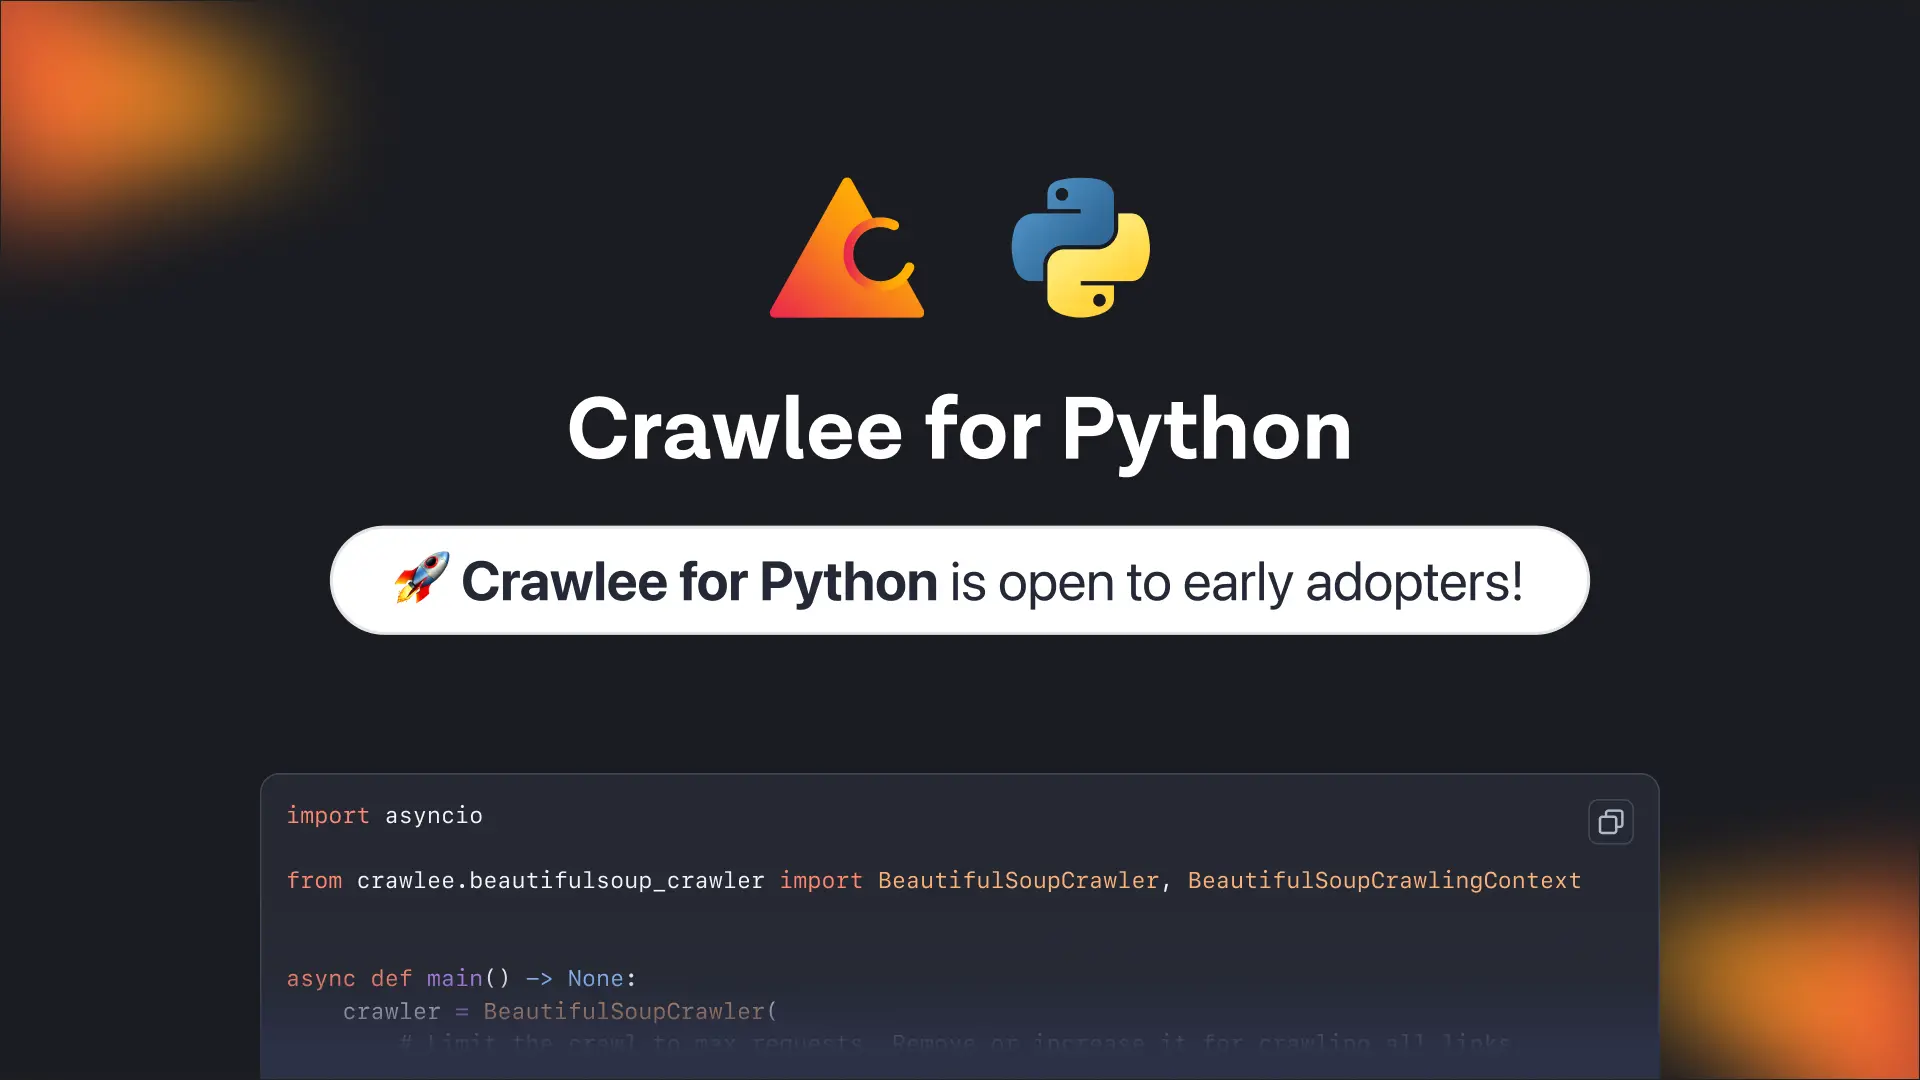 Crawlee for Python is looking for early adopters